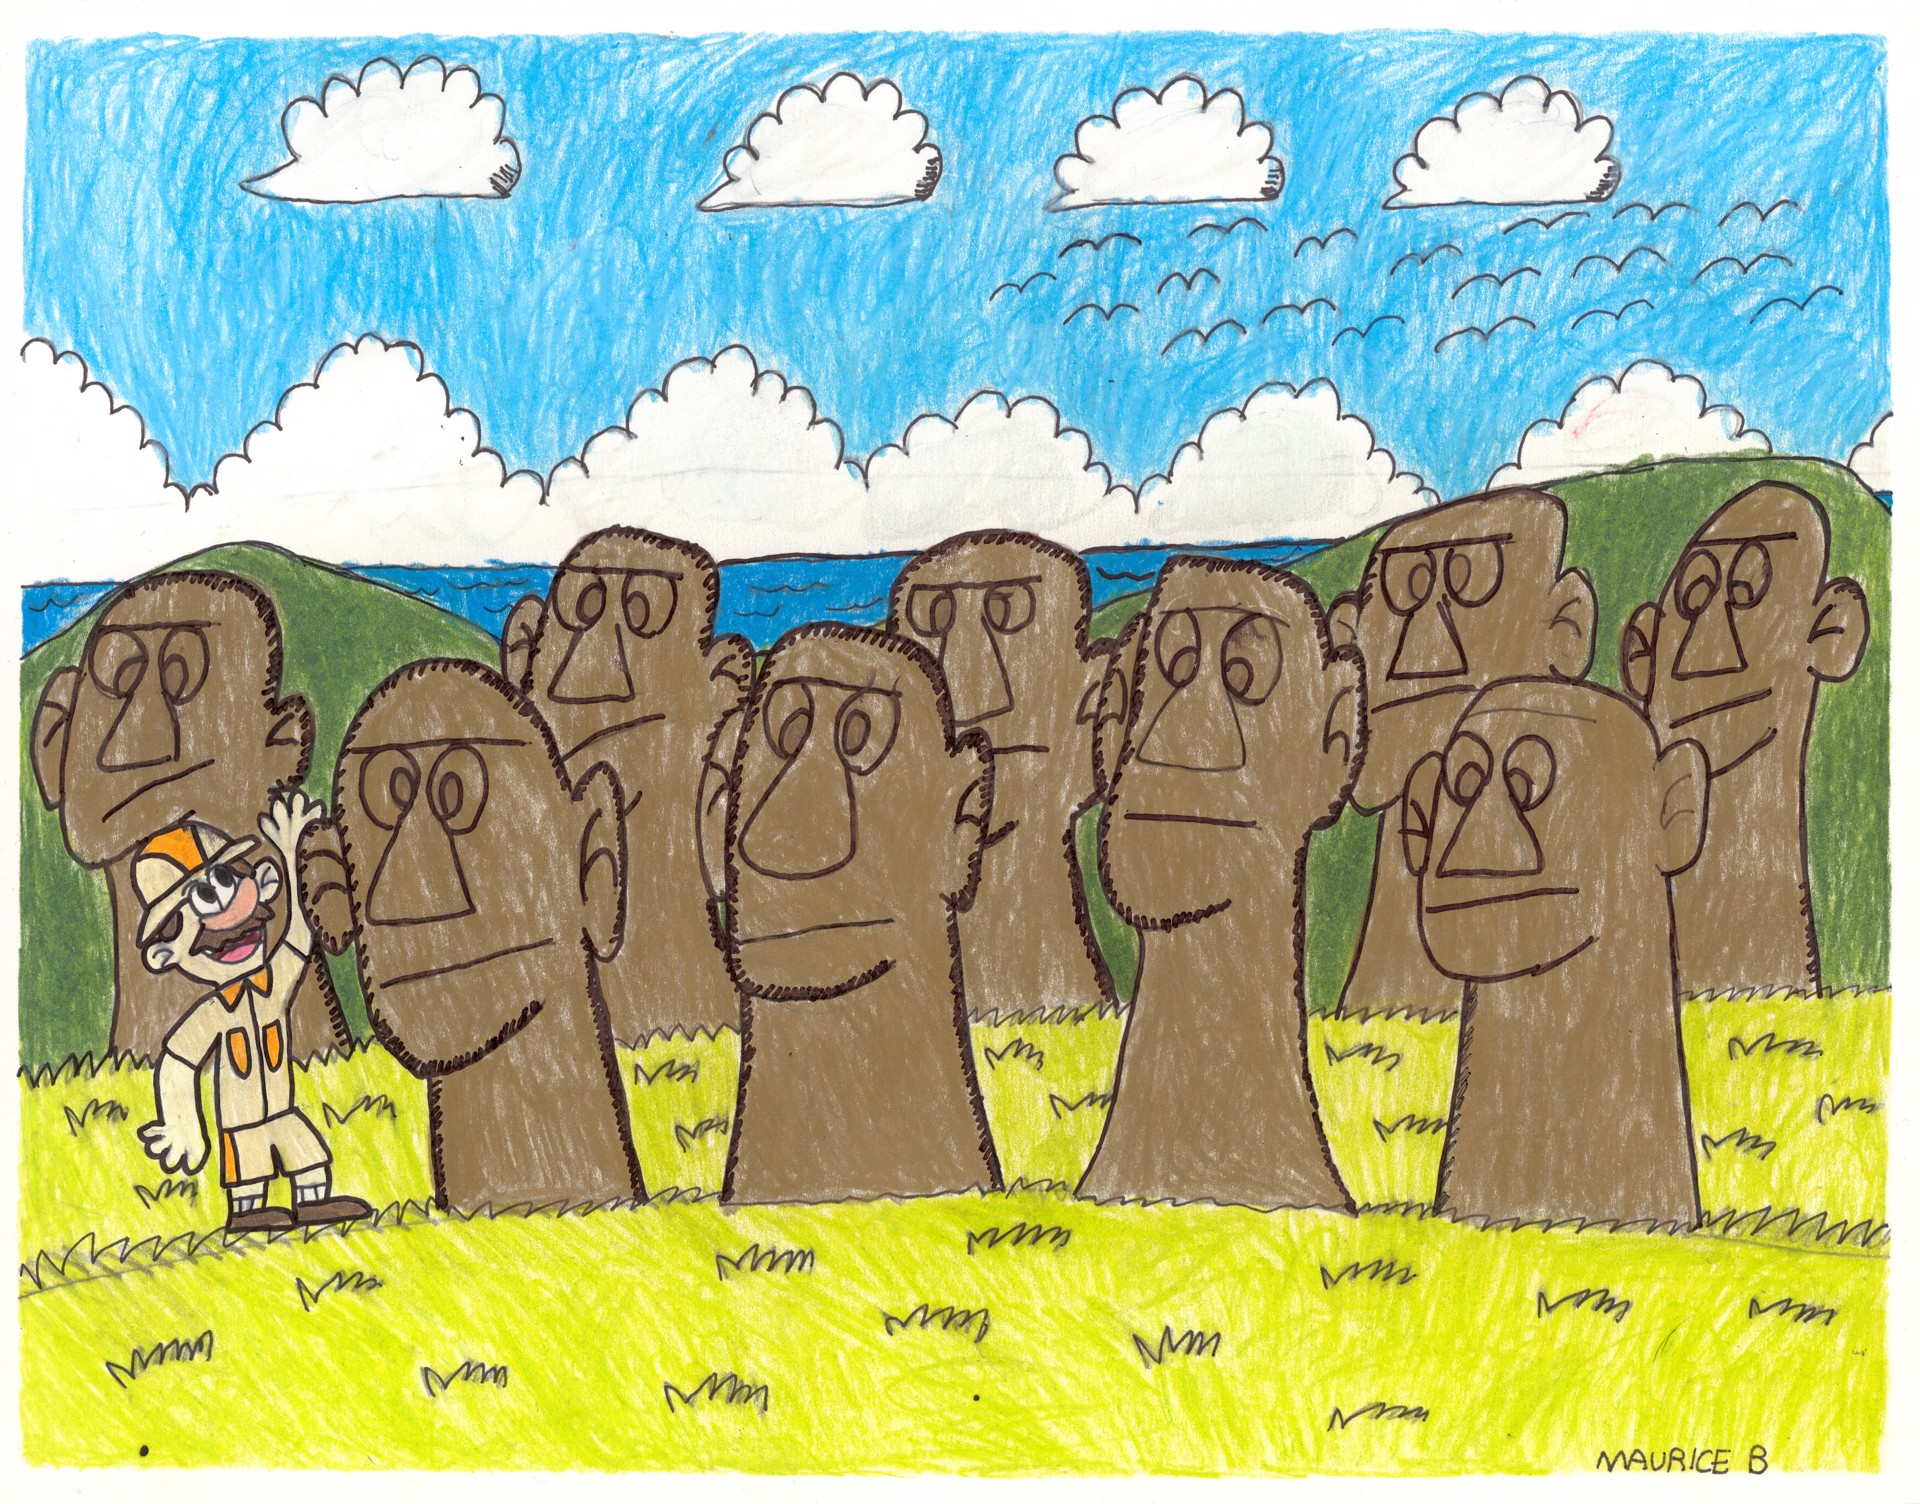 Easter Island Meets the Man by Maurice Barnes